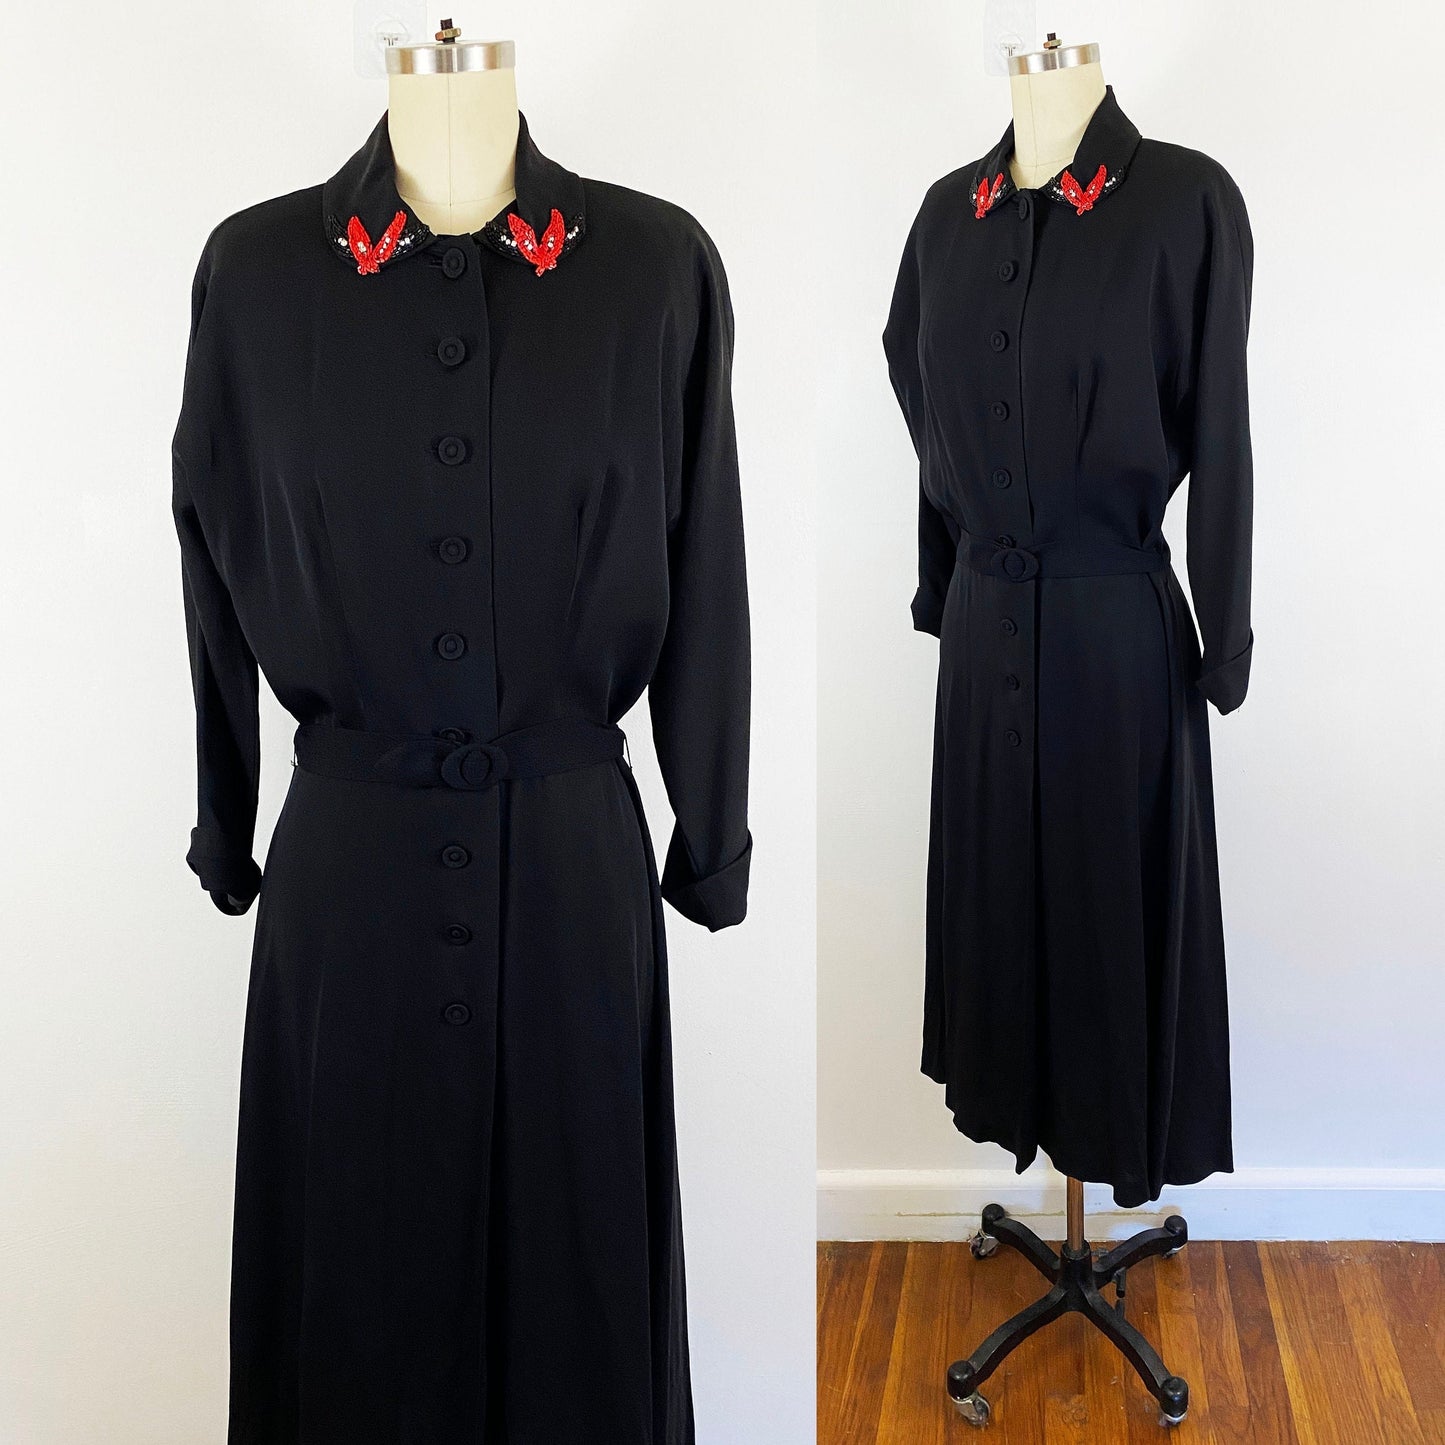 1940's Paul Sachs Black Rayon Shirtwaist Gown with Sequin Peter Pan Collar A-line Dress Goth Vamp 40’s Sexy Retro Vintage / Size Medium 8/10